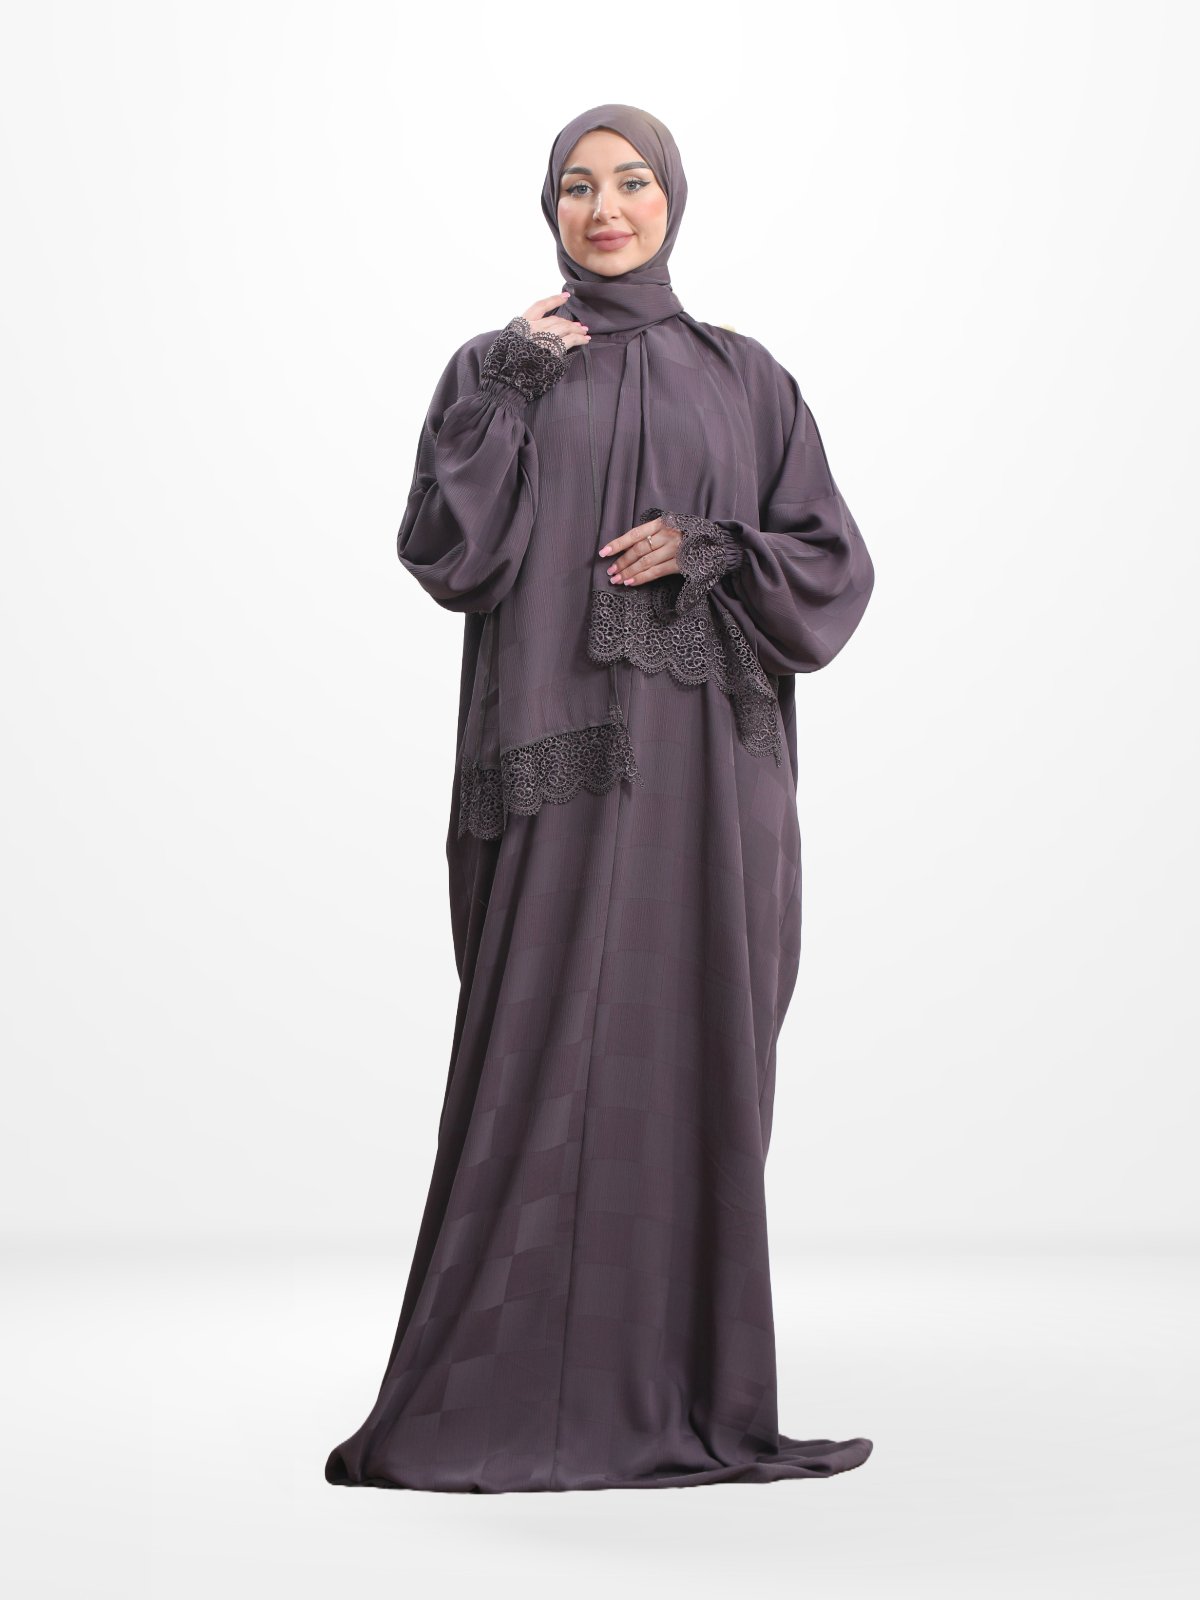 One - Piece Prayer Dress & Abaya with attached Hijab - Plaid Patterned Crepe - Modest Essence